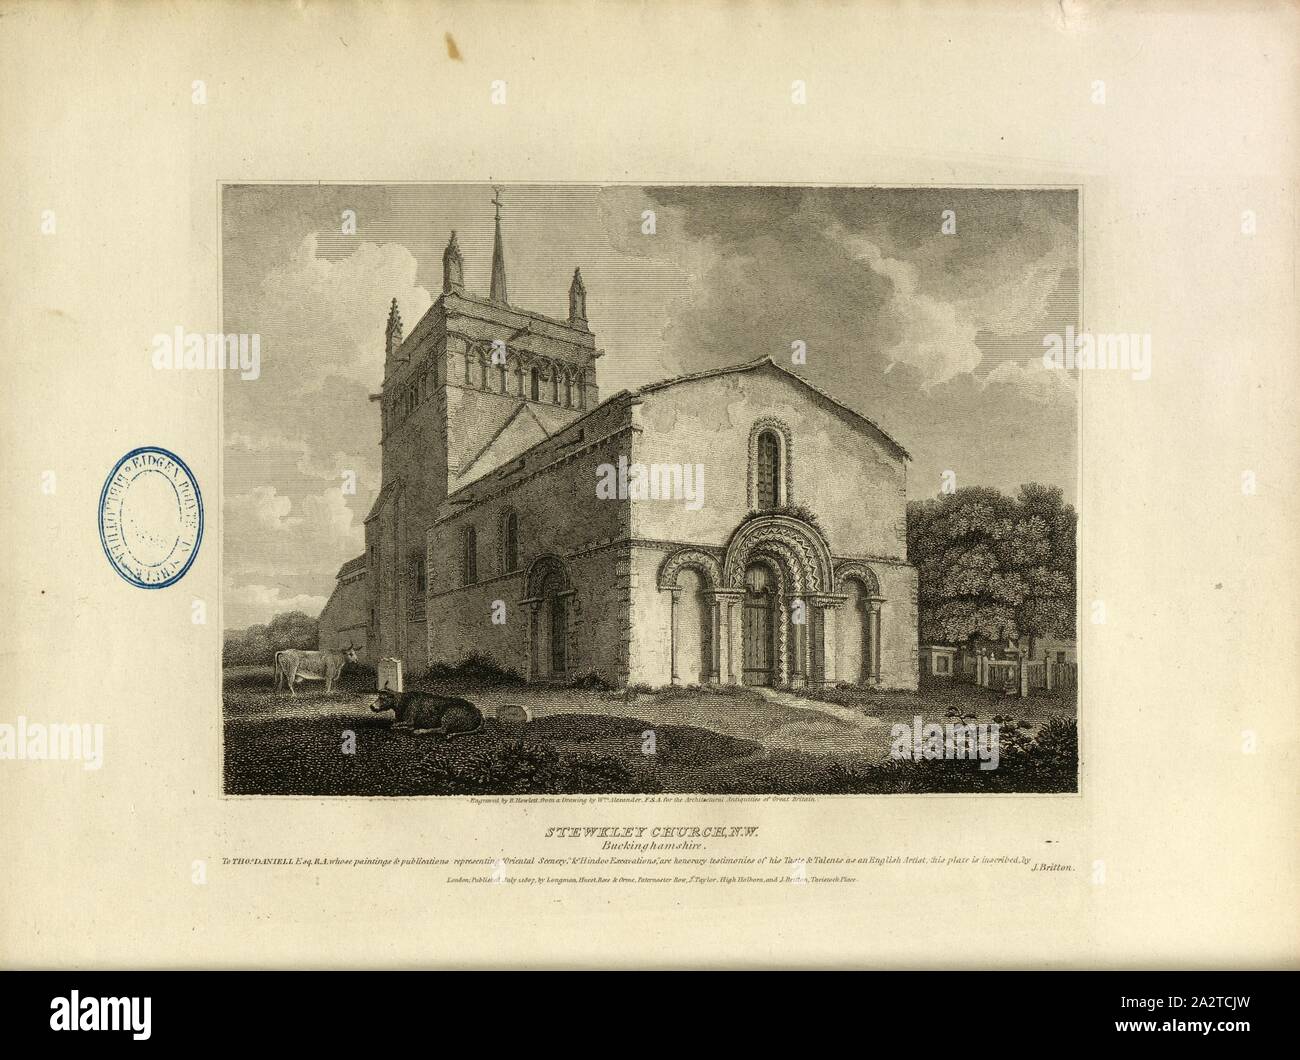 Stewkley Church, N. W. Buckinghamshire, Parish Church of St Michael and All Angels in Stewkley, signed: Engraved by B. Howlett from a Drawing by W. Alexander, Fig. 1, according to S. II, Alexander, Willisam (Drawing); Howlett, Bartholomew (engr.), 1812, John Britton: The architectural antiquities of Great Britain: represented and illustrated in a series of views, elevations, plans, sections and details of various ancient English edifices: with historical and descriptive accounts of each. Bd. 2. London: J. Taylor, 1807-1826 Stock Photo